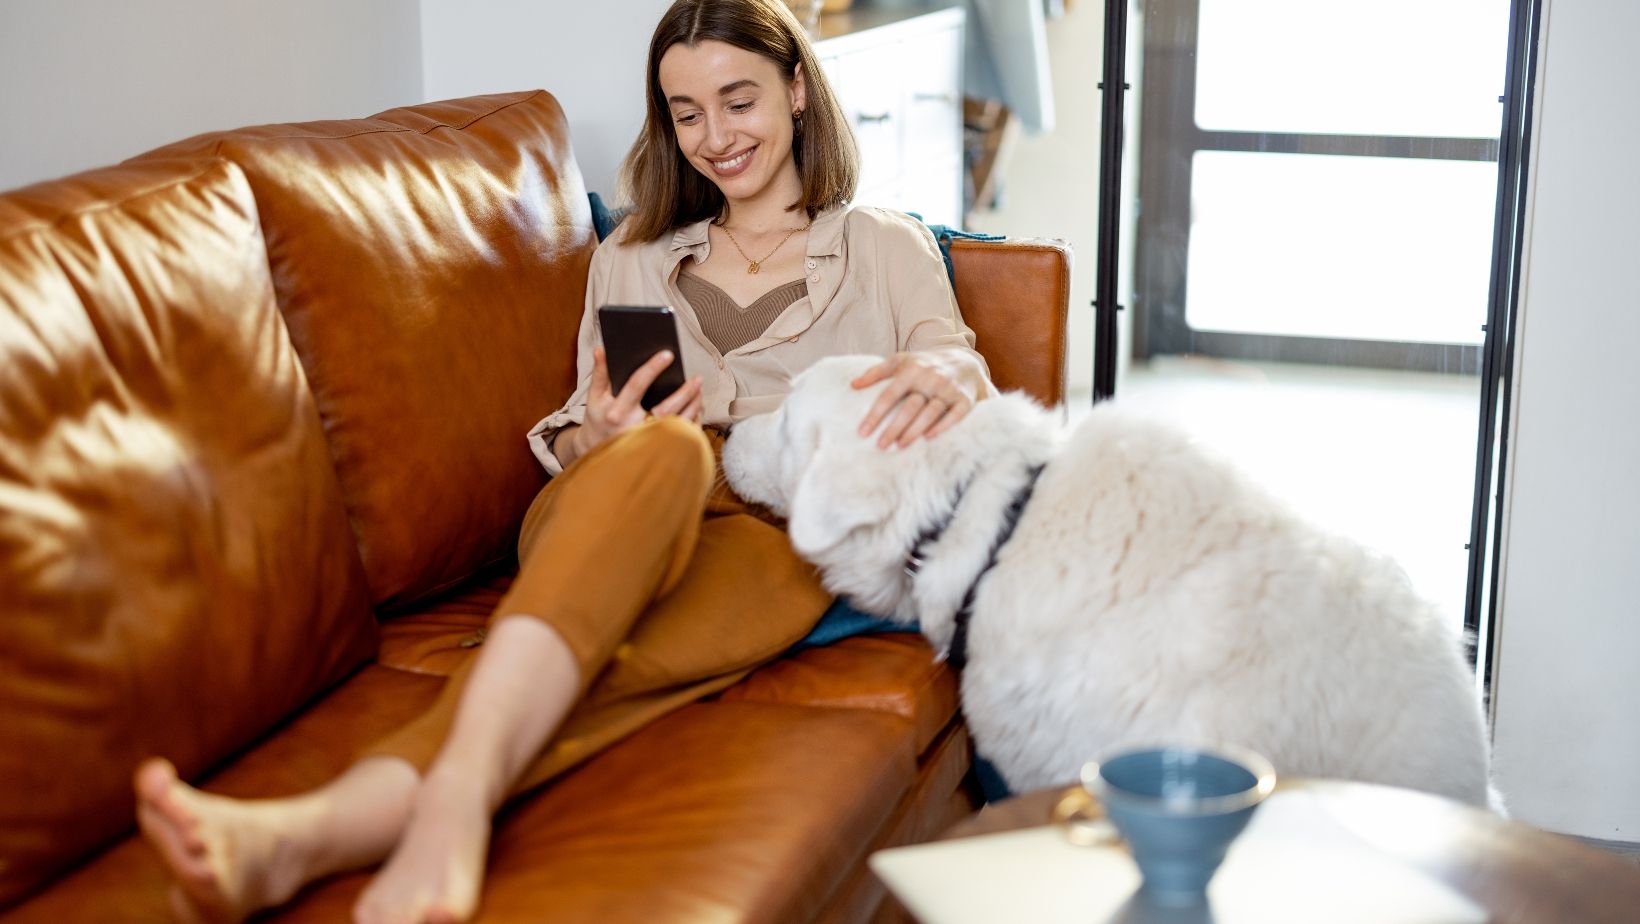 A woman sited in a couch holding a dog